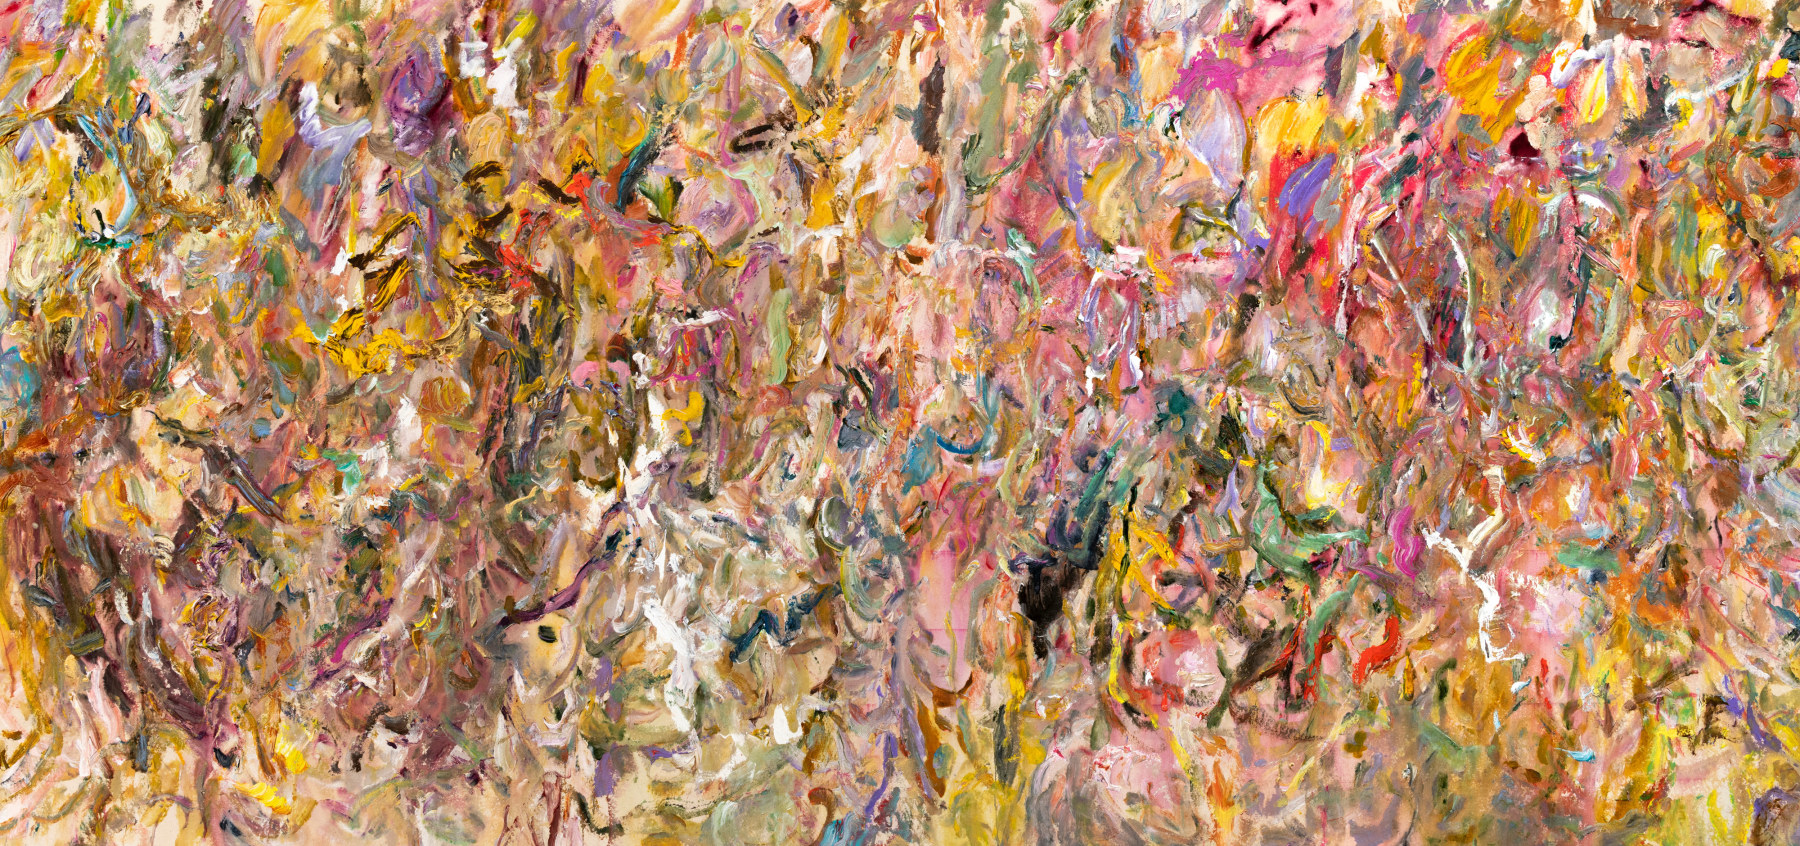 LARRY POONS (American b. 1937)

Order

2021

Acrylic on canvas

55 1/2 x 117 1/2 inches

141 x 298.5cm